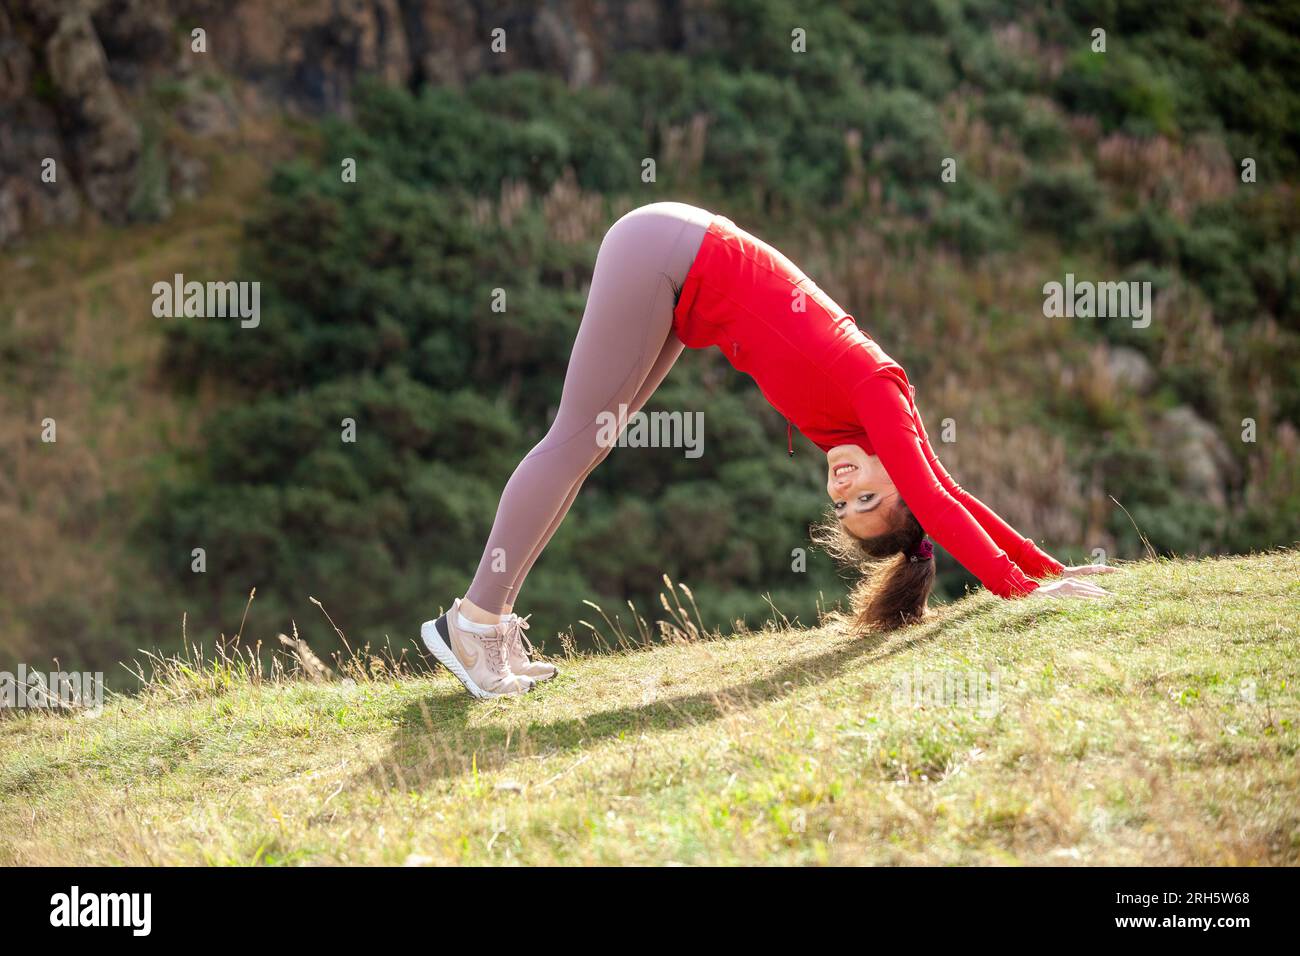 A young woman wearing leggings and performing the downward dog yoga stretch in a public park in Edinburgh Stock Photo